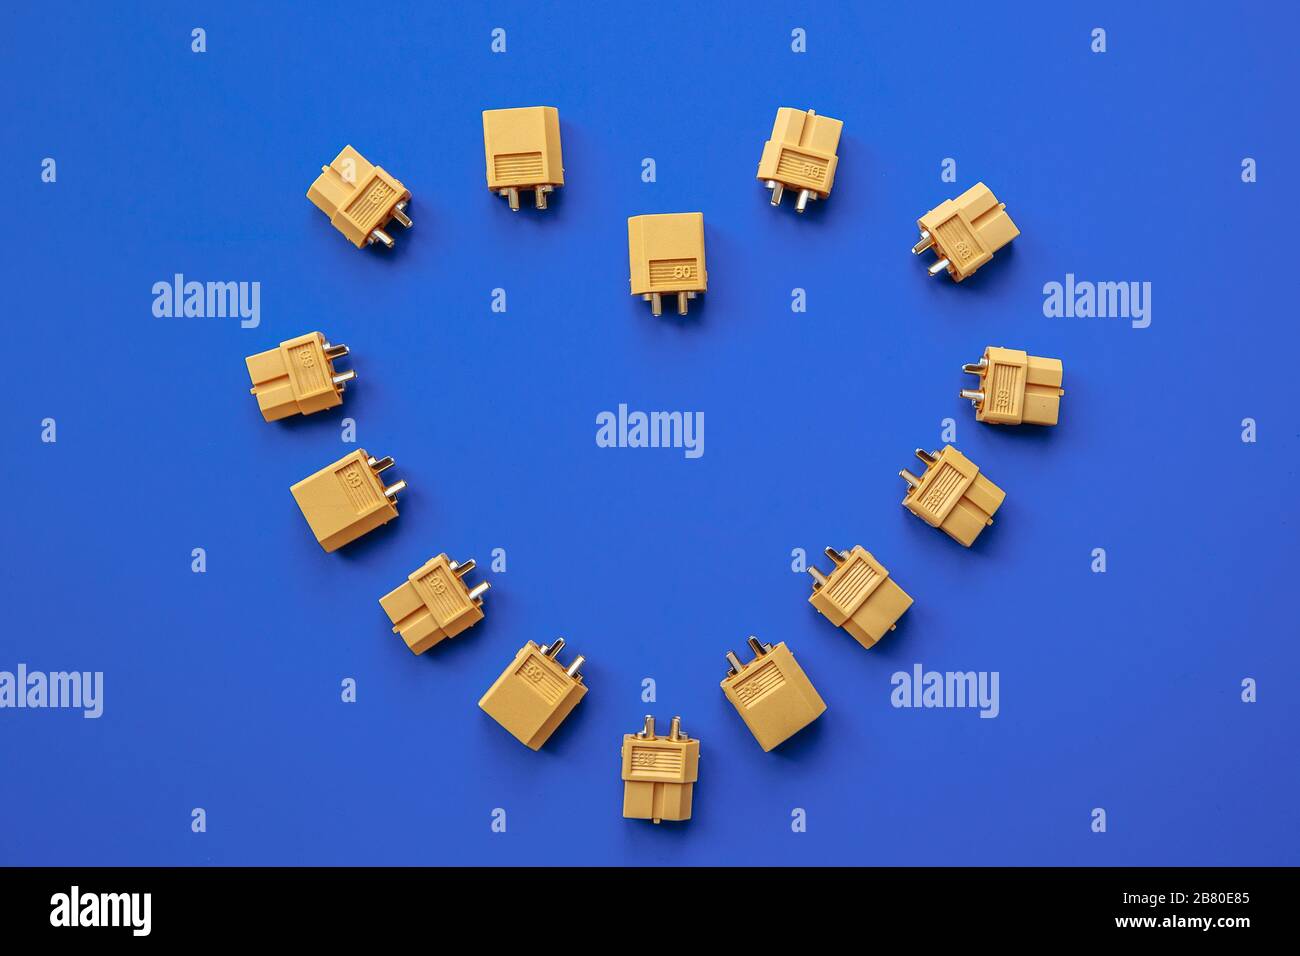 Heart made of yellow XT-60 connectors for power supply on a blue background. The heart of an electronic engineer. Stock Photo